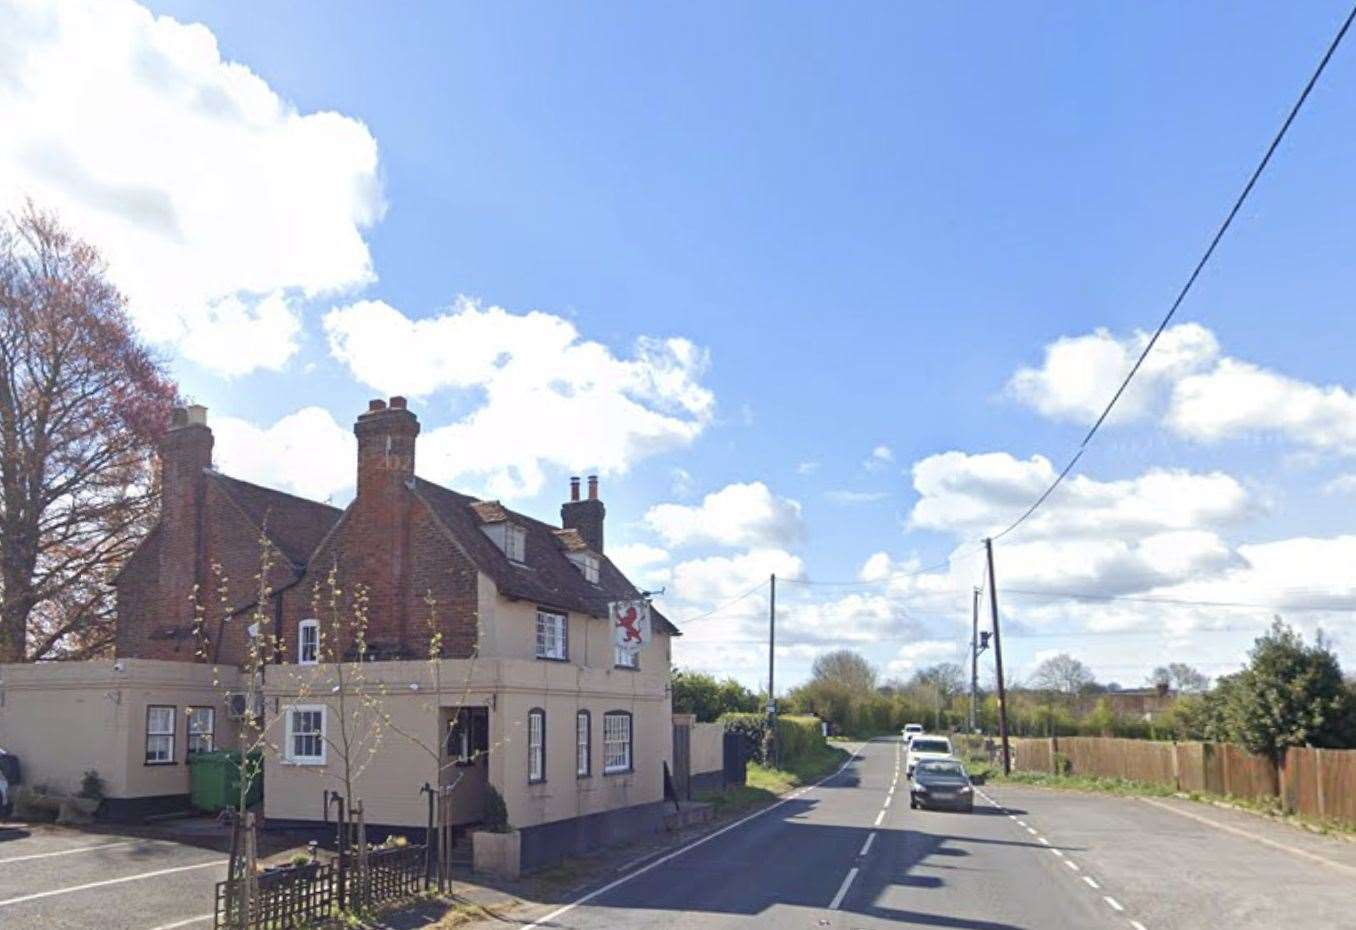 The crash happened near The Red Lion pub on the A251 in Badlesmere, Faversham. Picture: Google